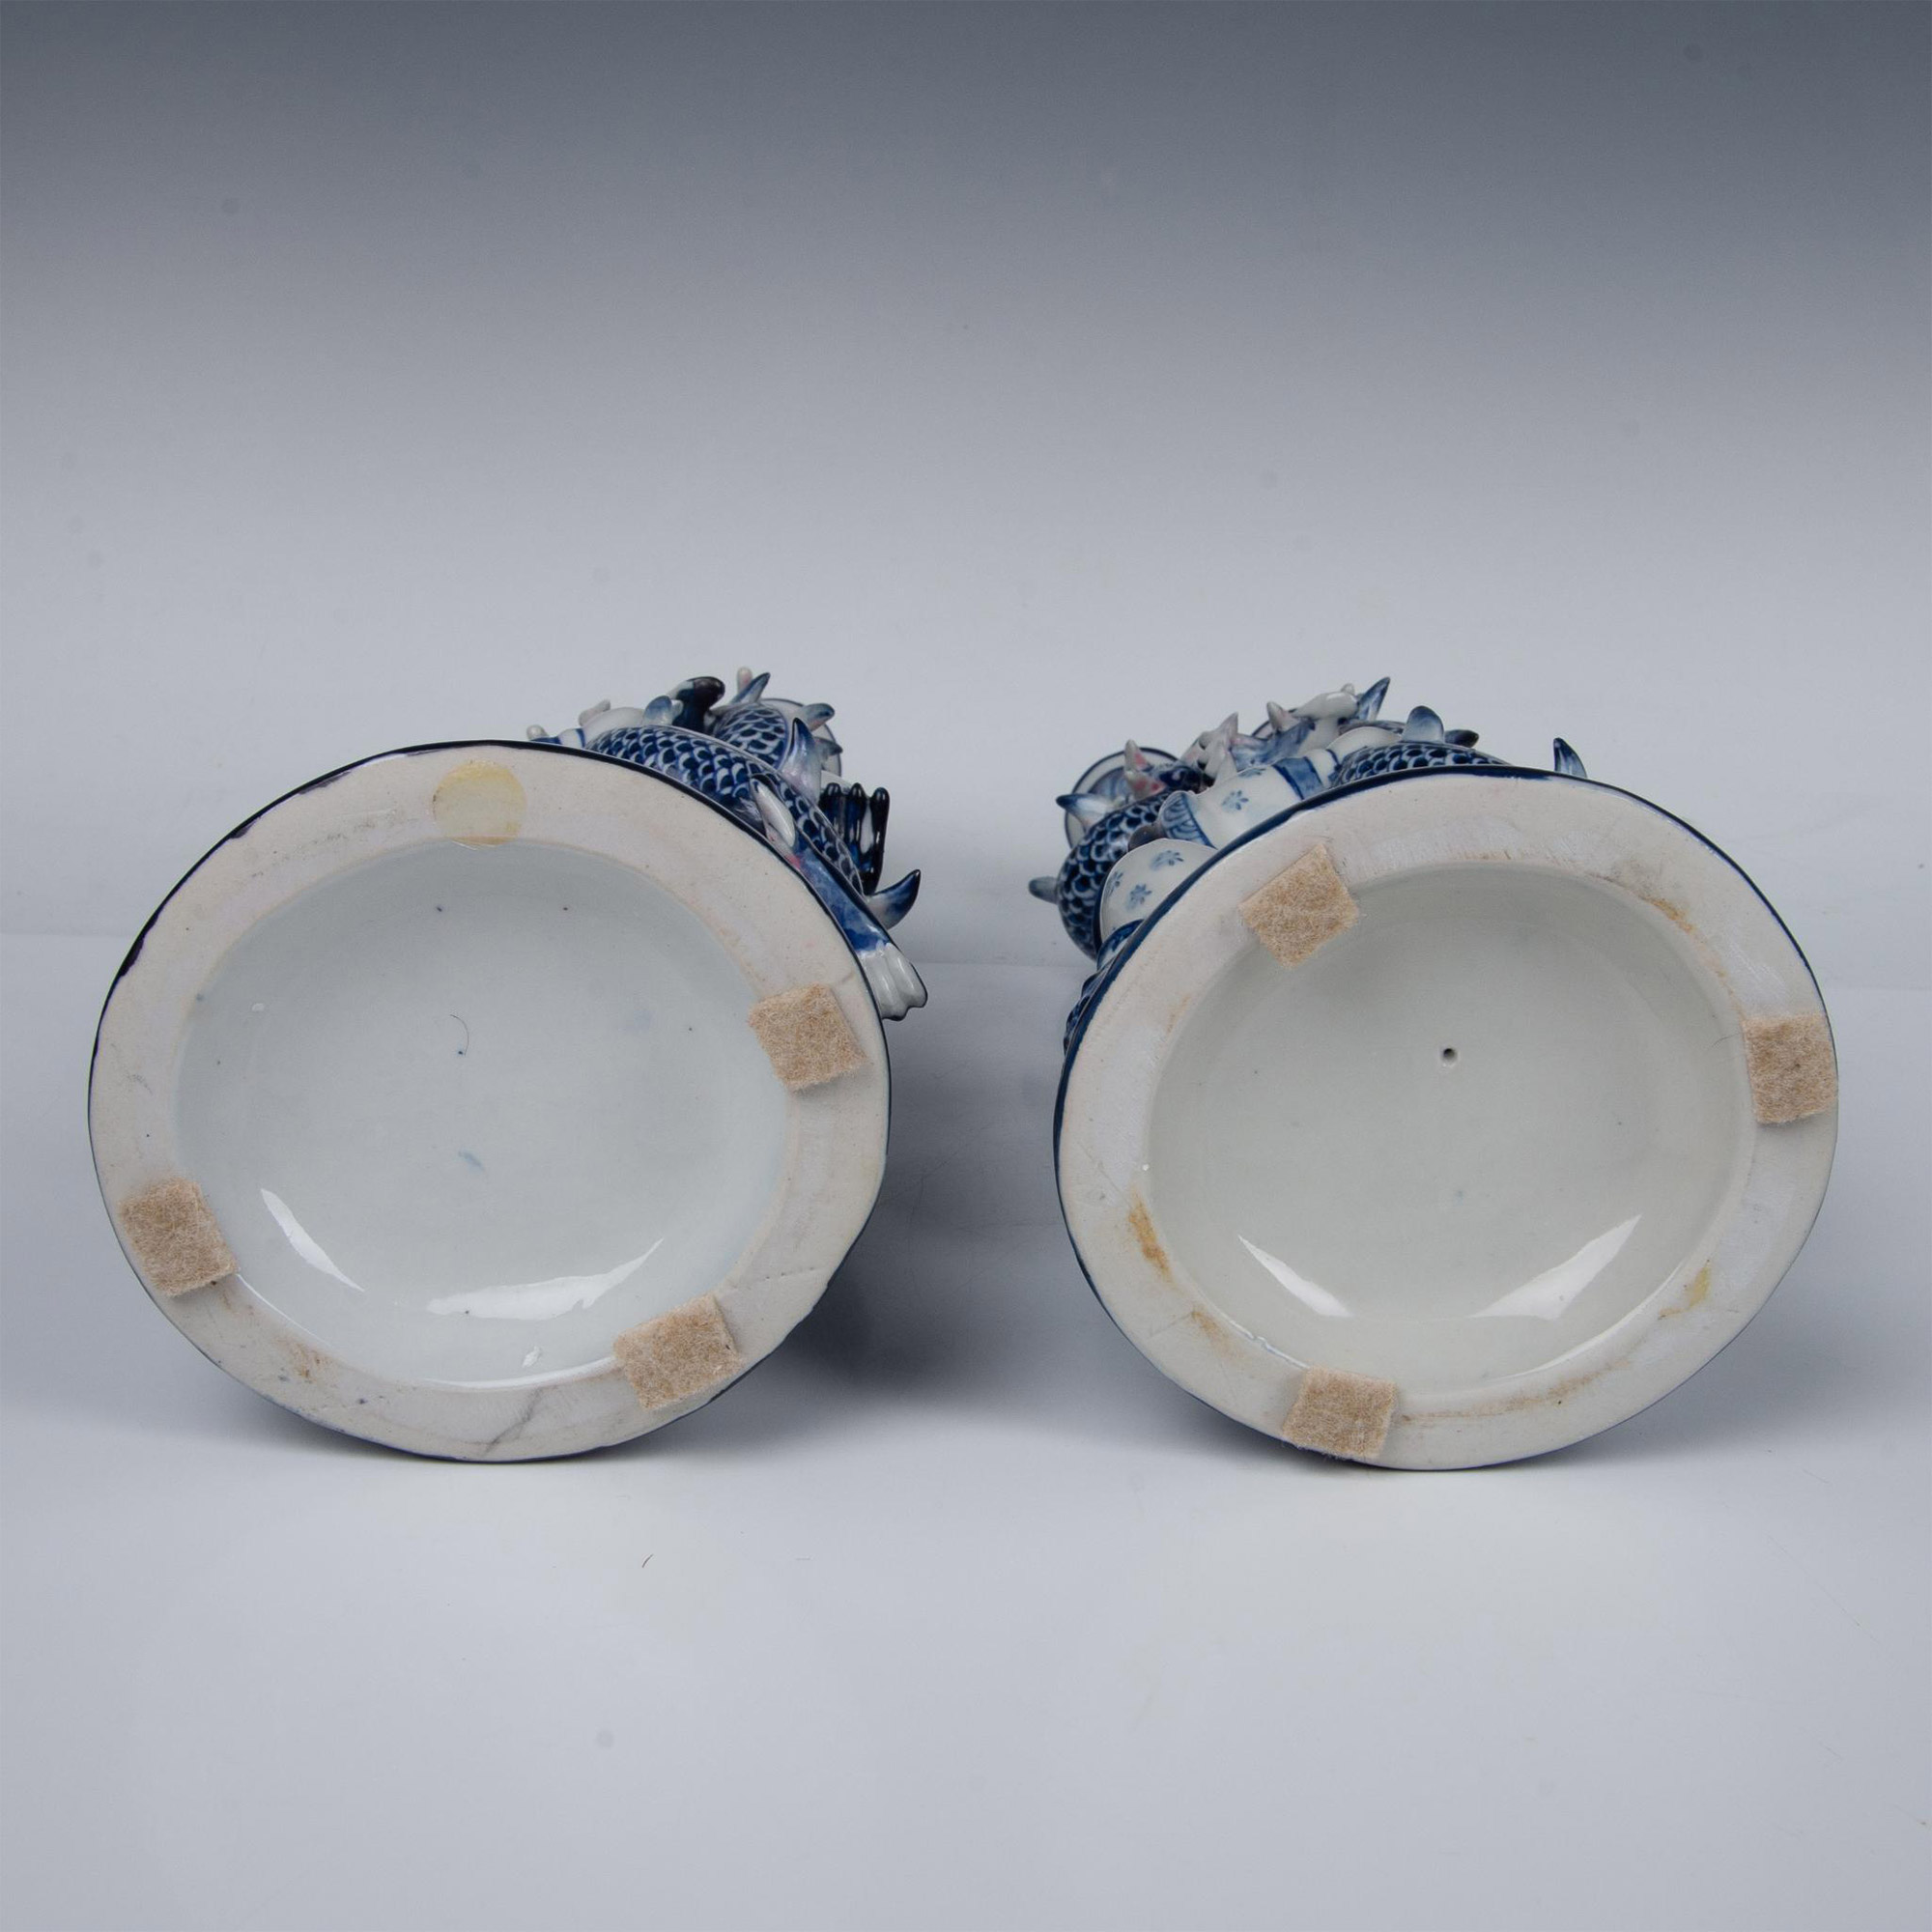 2pc Chinese Blue/White Porcelain Serpentine Candleholders - Image 7 of 7